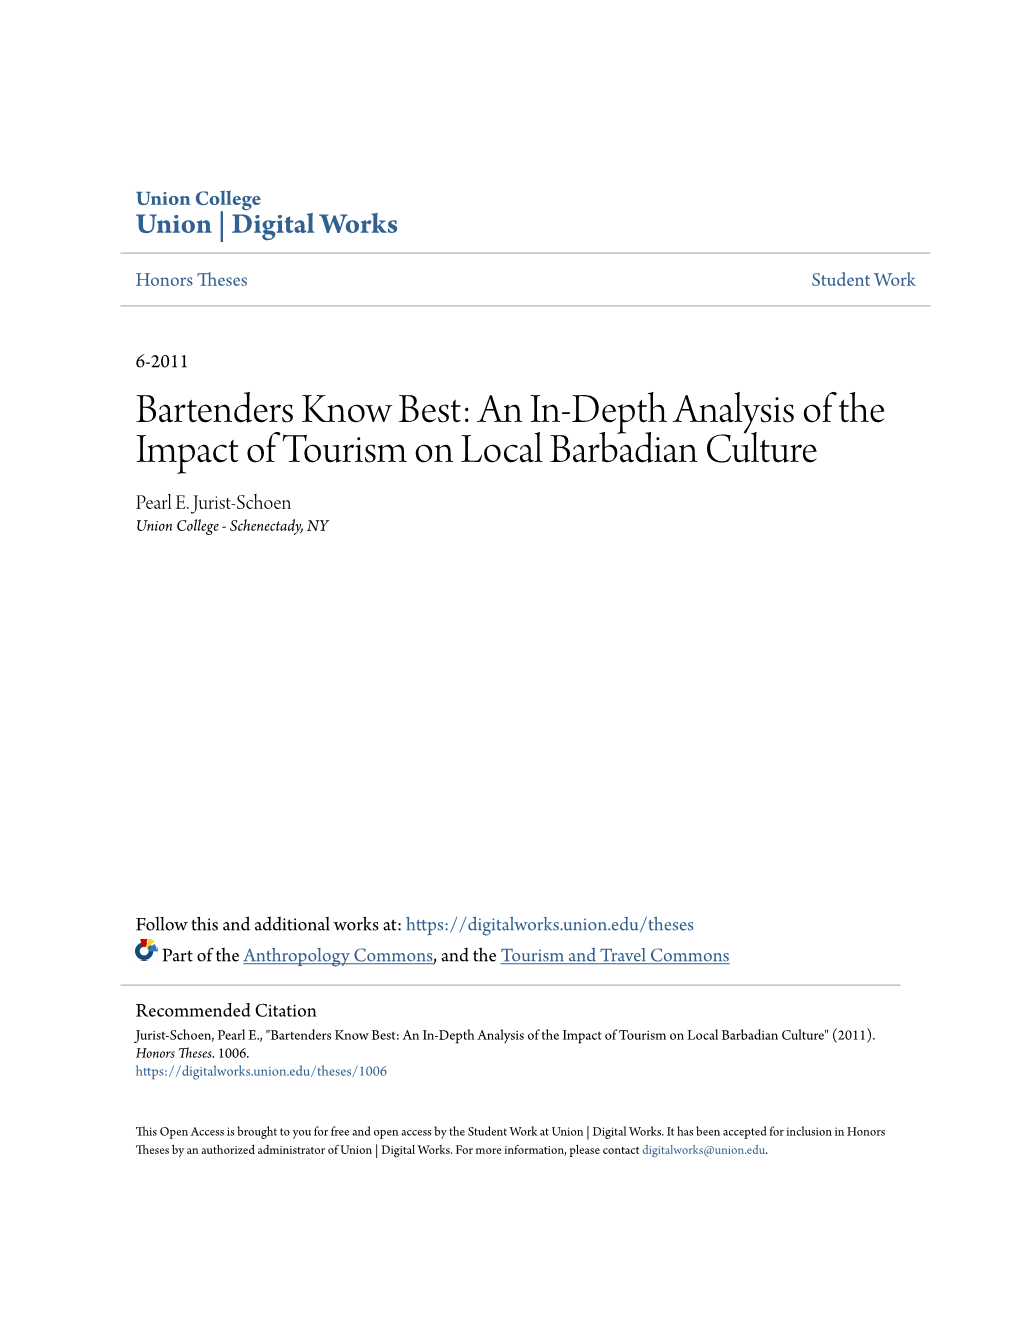 An In-Depth Analysis of the Impact of Tourism on Local Barbadian Culture Pearl E